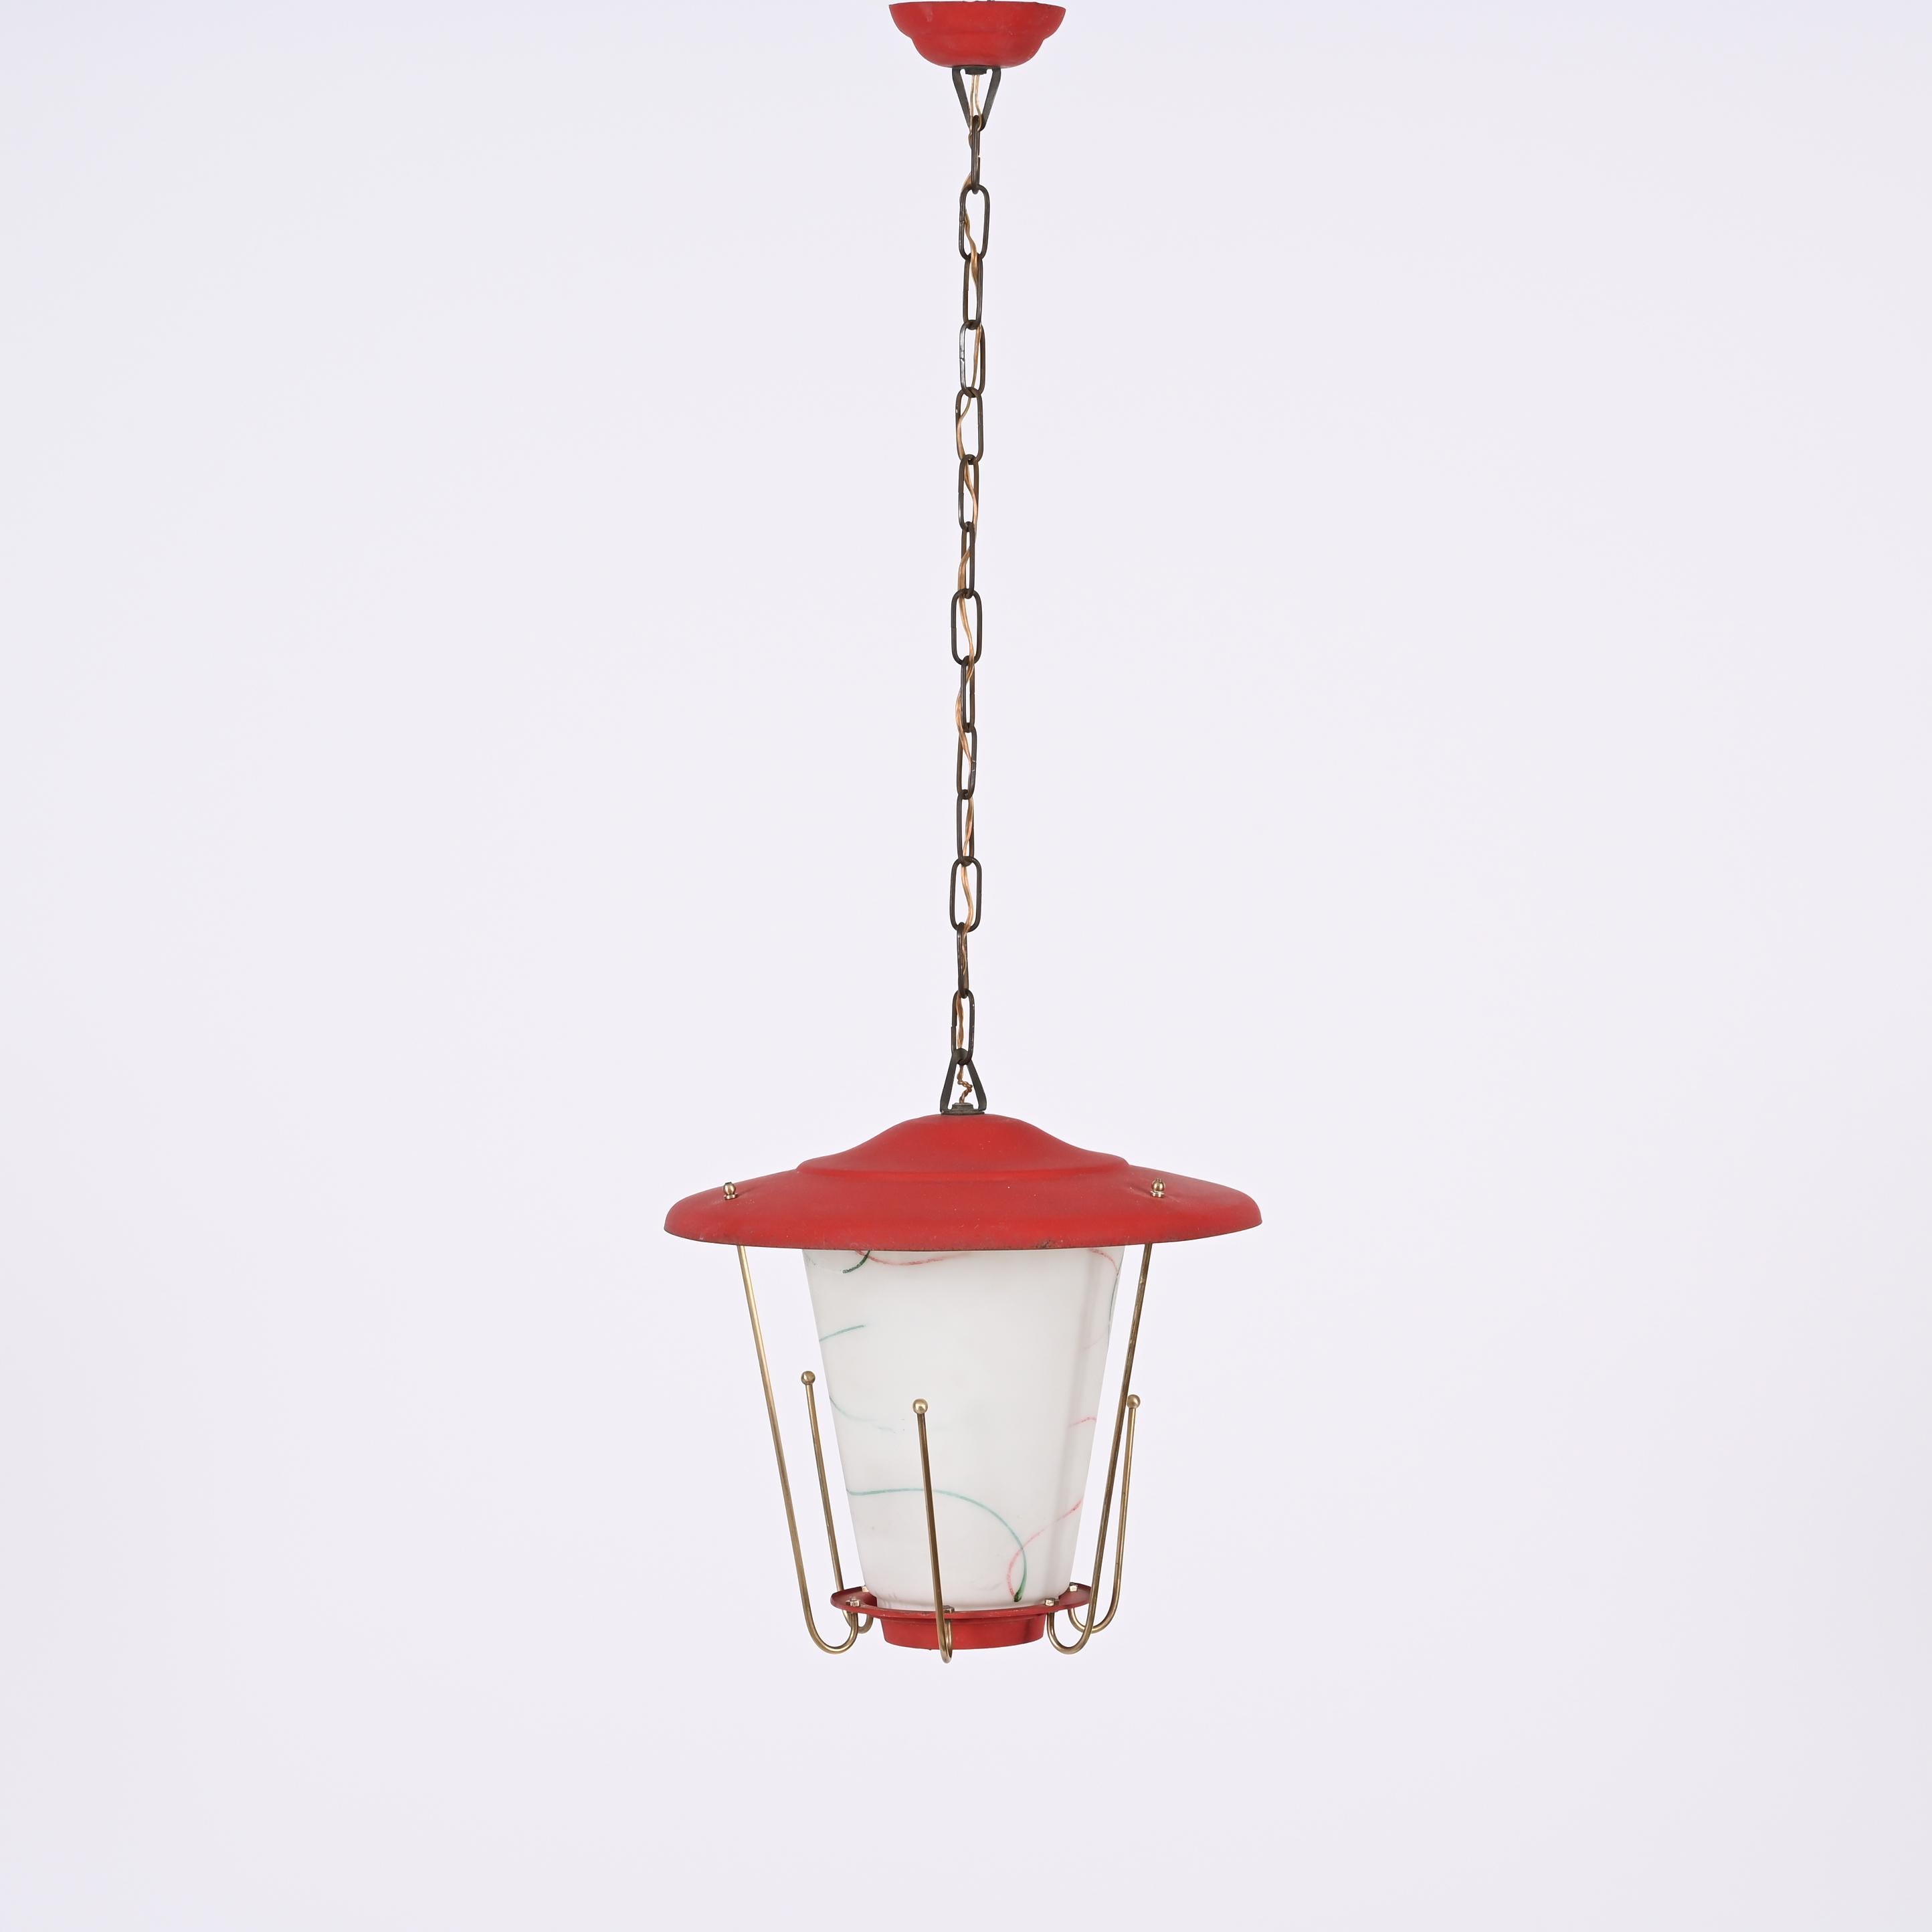 Lacquered Midcentury Round Opaline Glass and Brass Italian Red Lantern Chandelier, 1950s For Sale